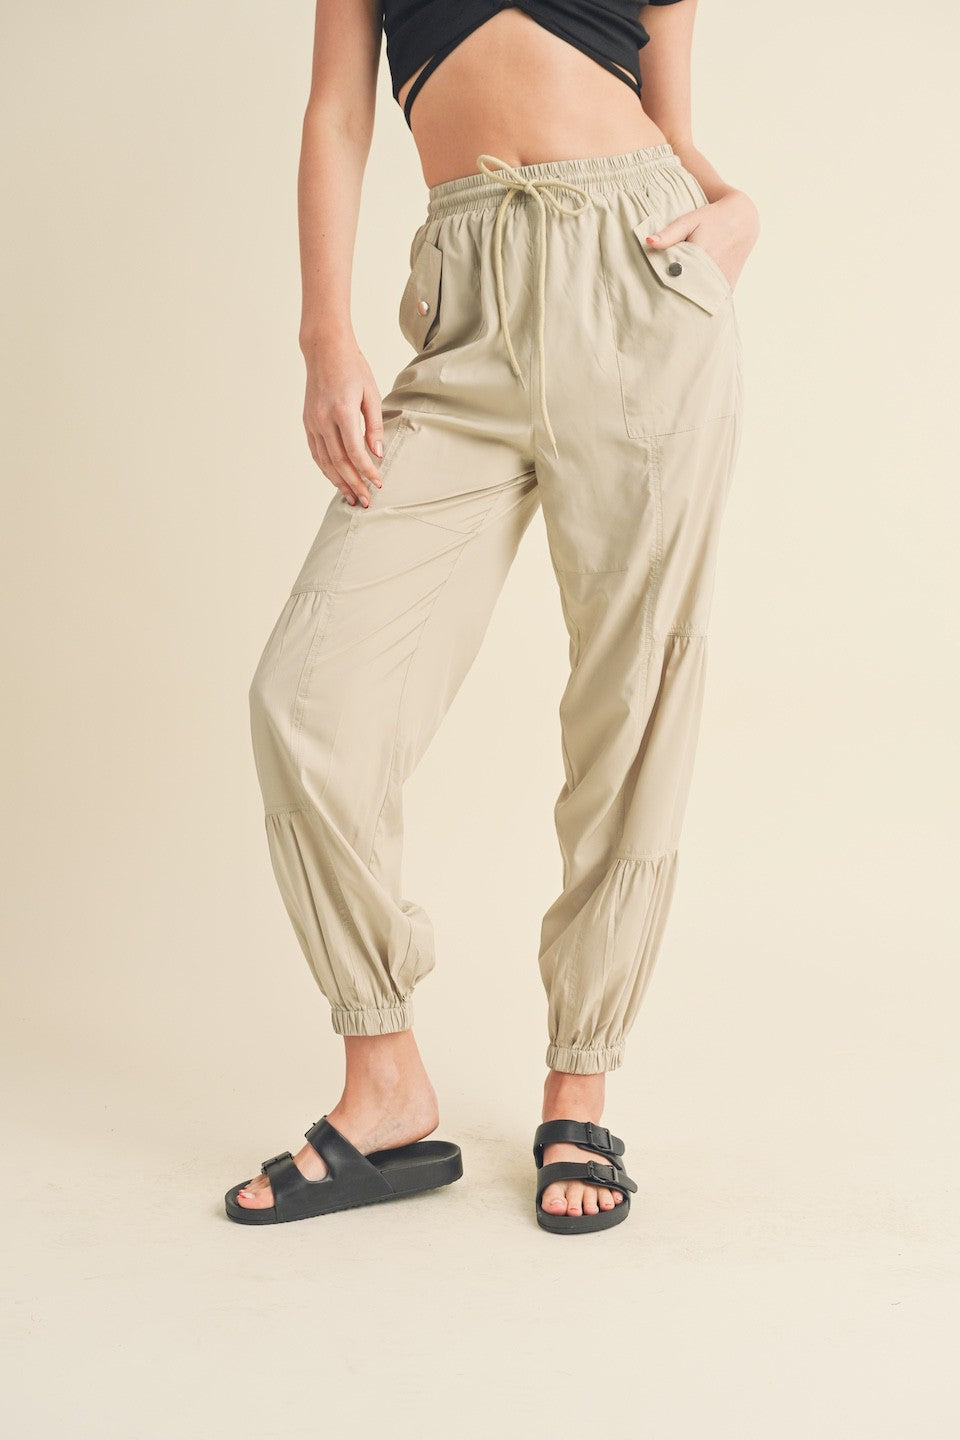 On-the-carGO Pants - Sage